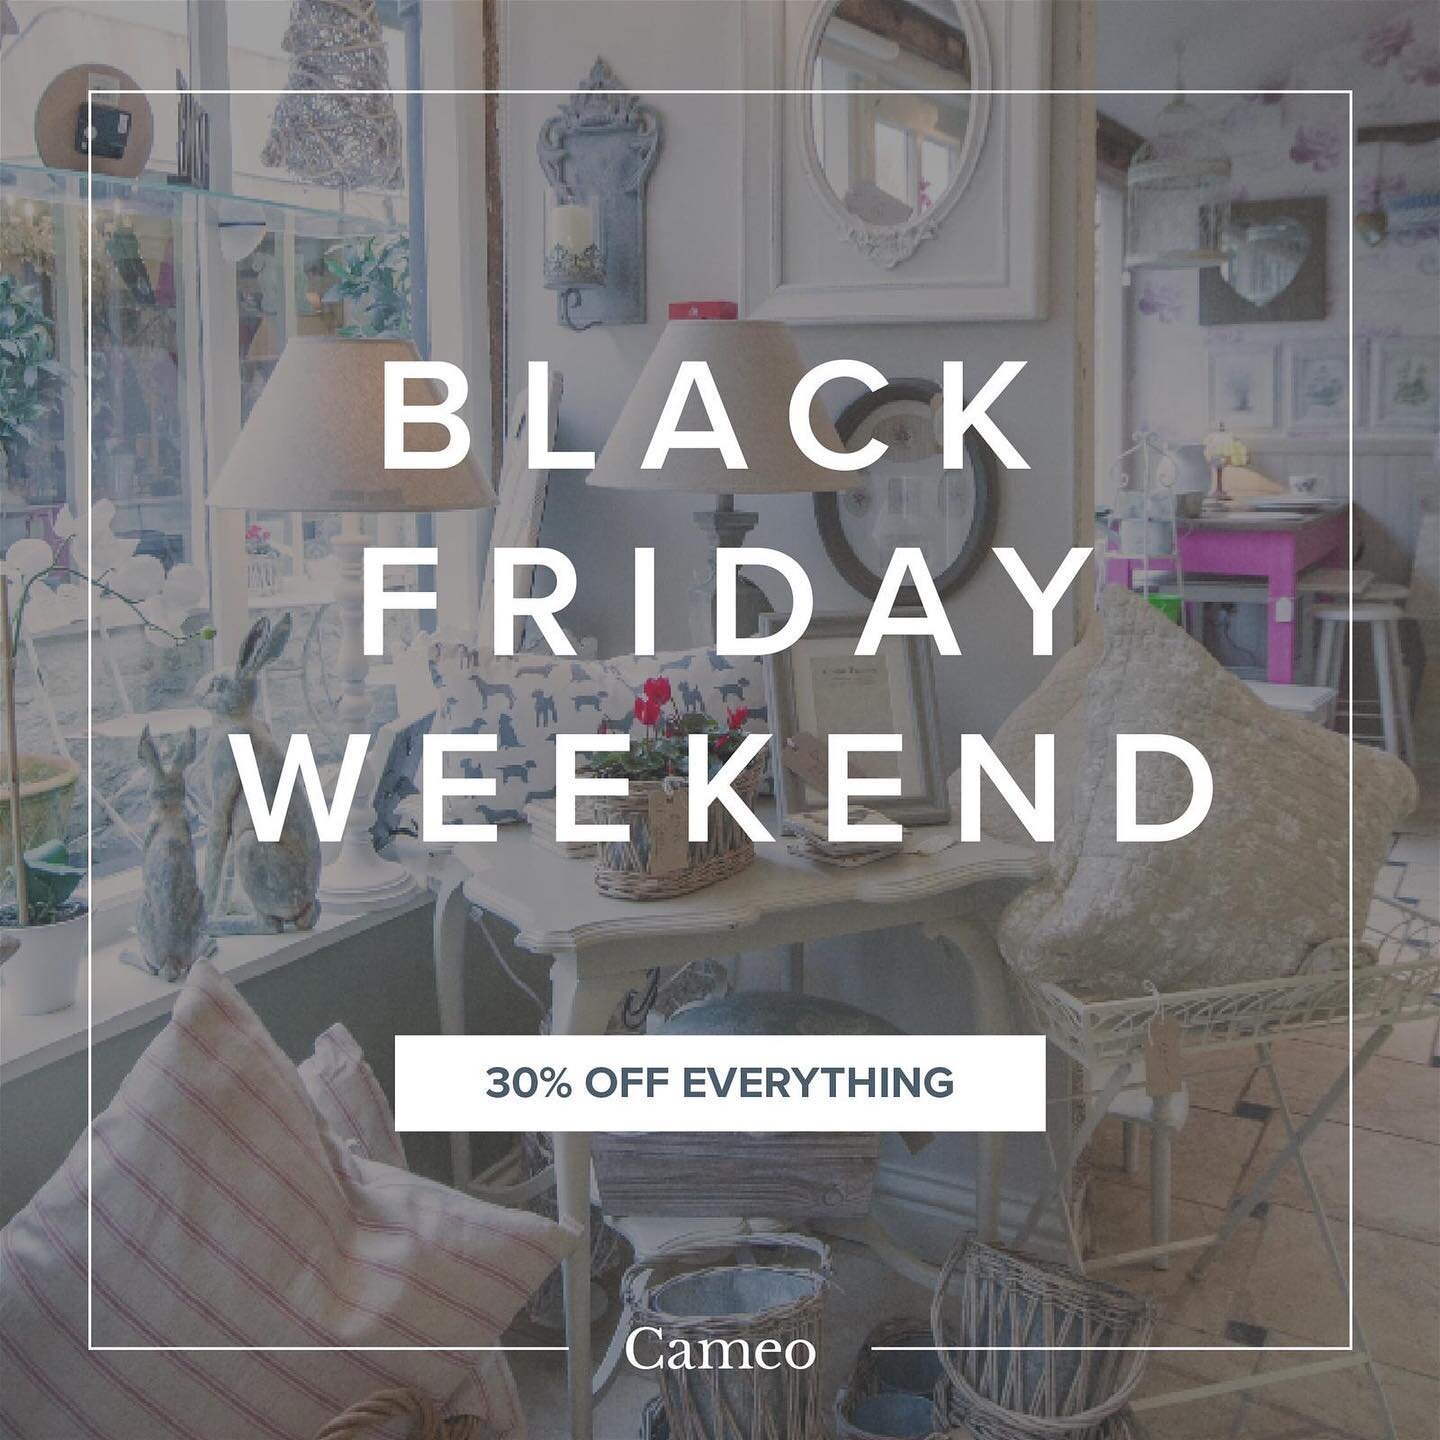 30% off everything at Cameo this Friday, Saturday and Sunday! Better be quick 🏃&zwj;♀️🏃🏻&zwj;♂️#blackfriday #blackfridaysale #cirencester #cotswolds #shoplocal